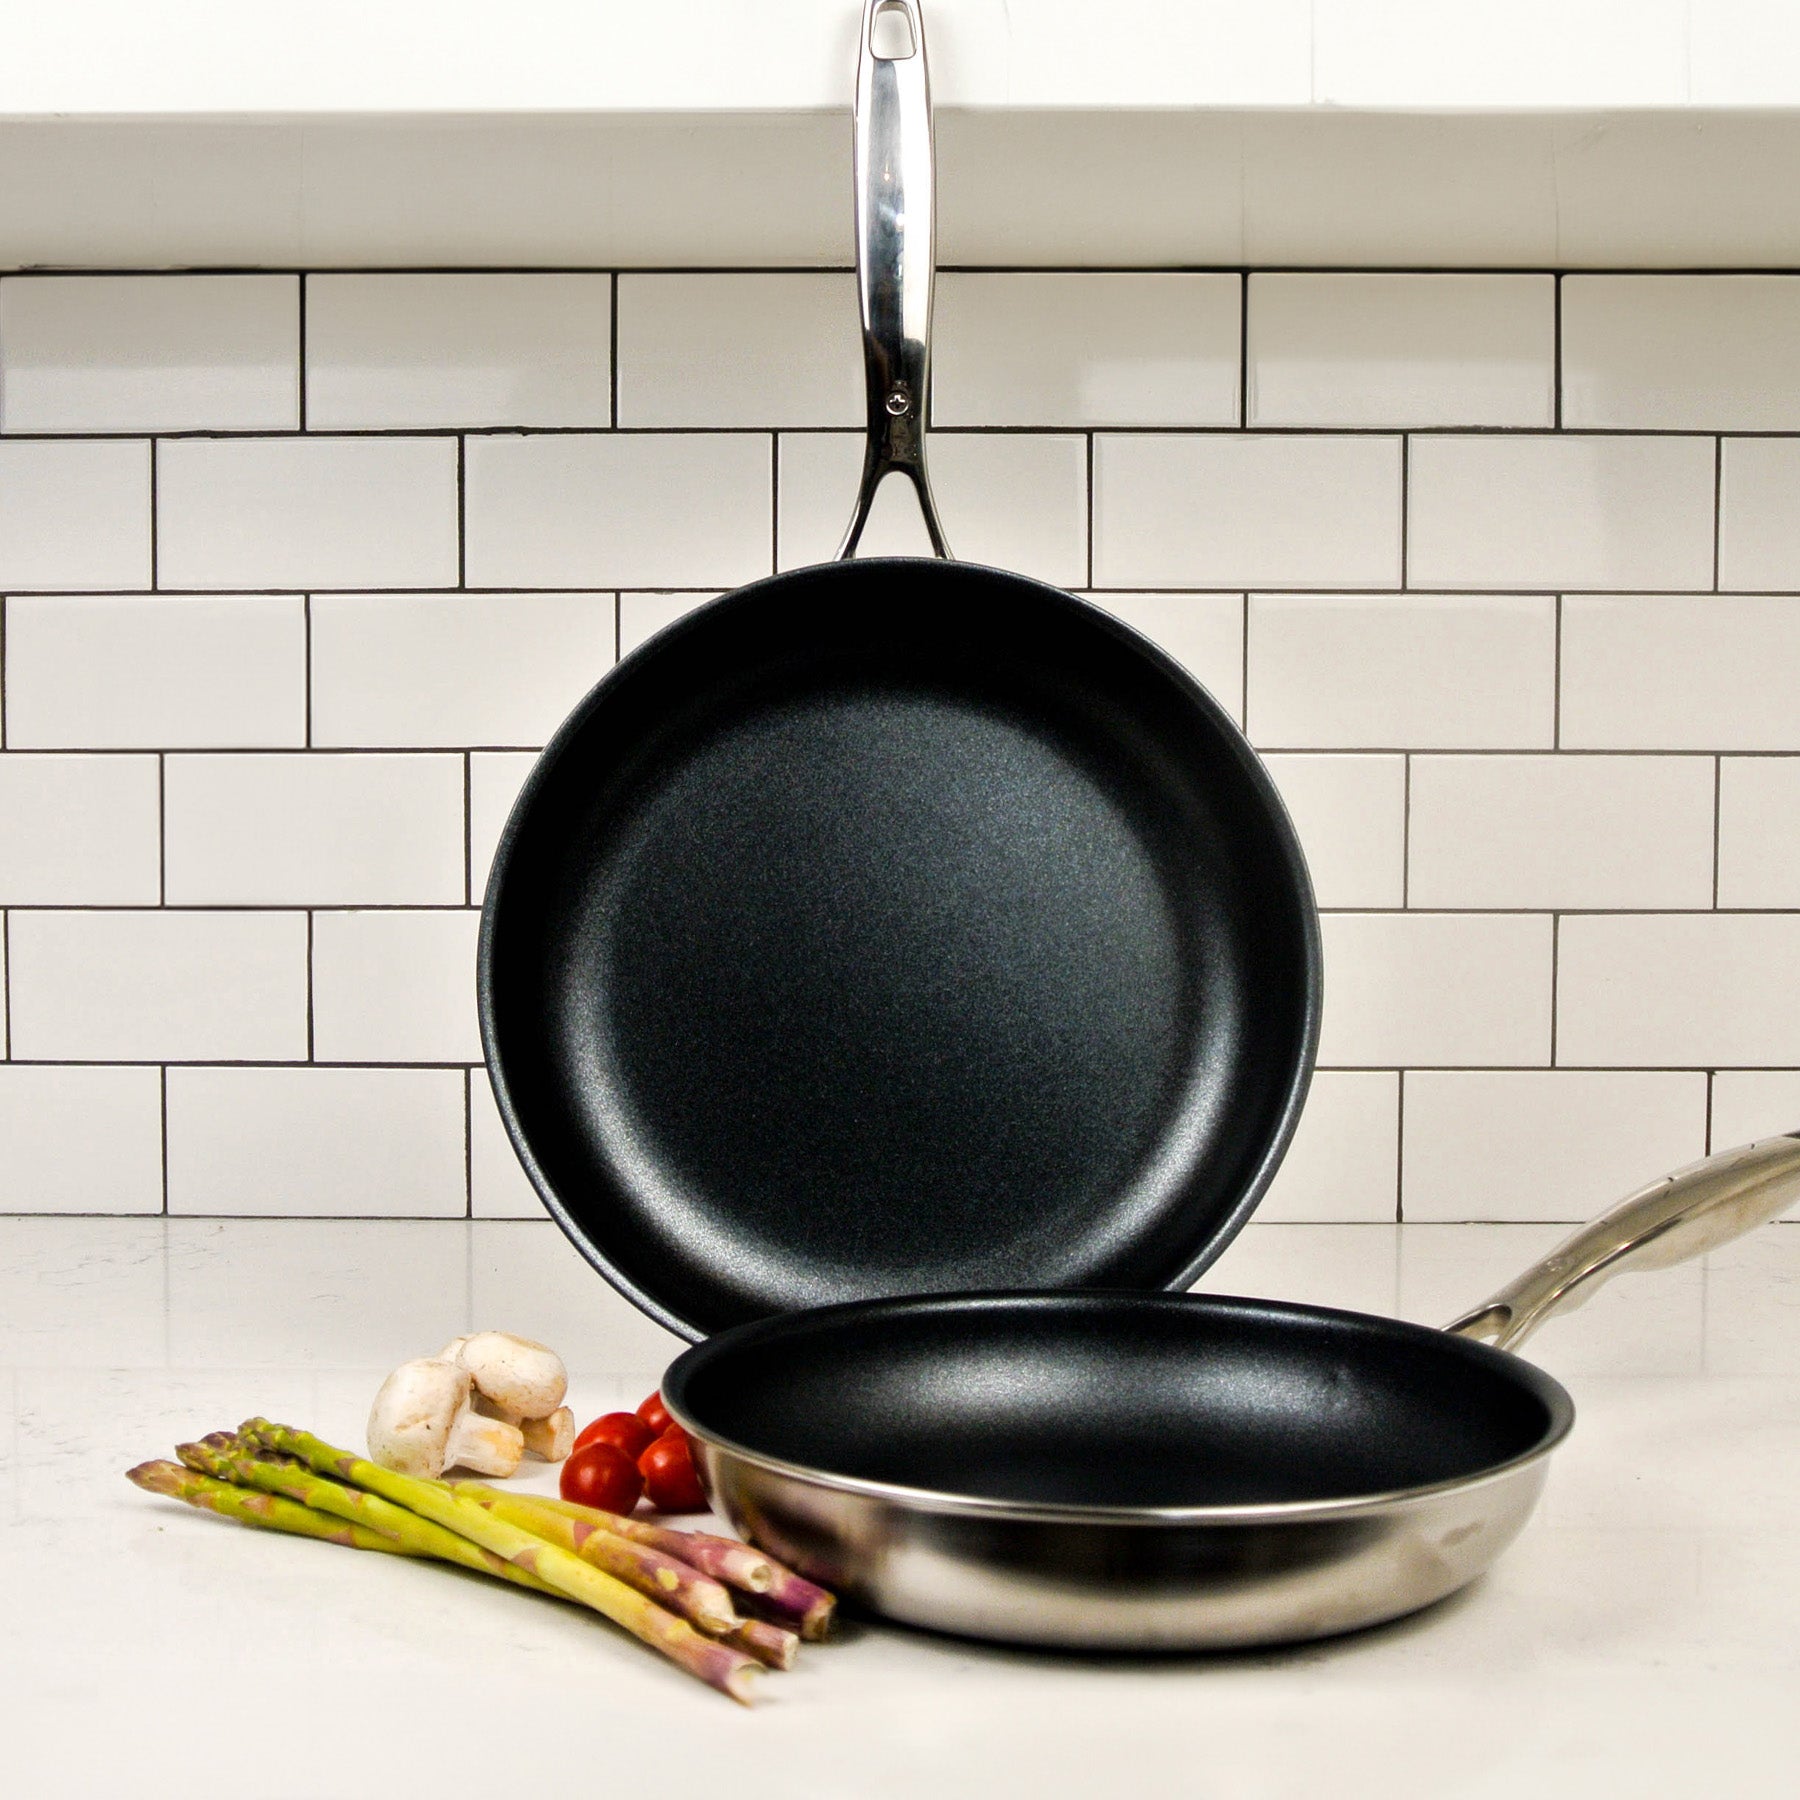 Nonstick Clad Fry Pan 2-Piece Set - Induction in use on a kitchen counter one pan is vertical and other is lying flat